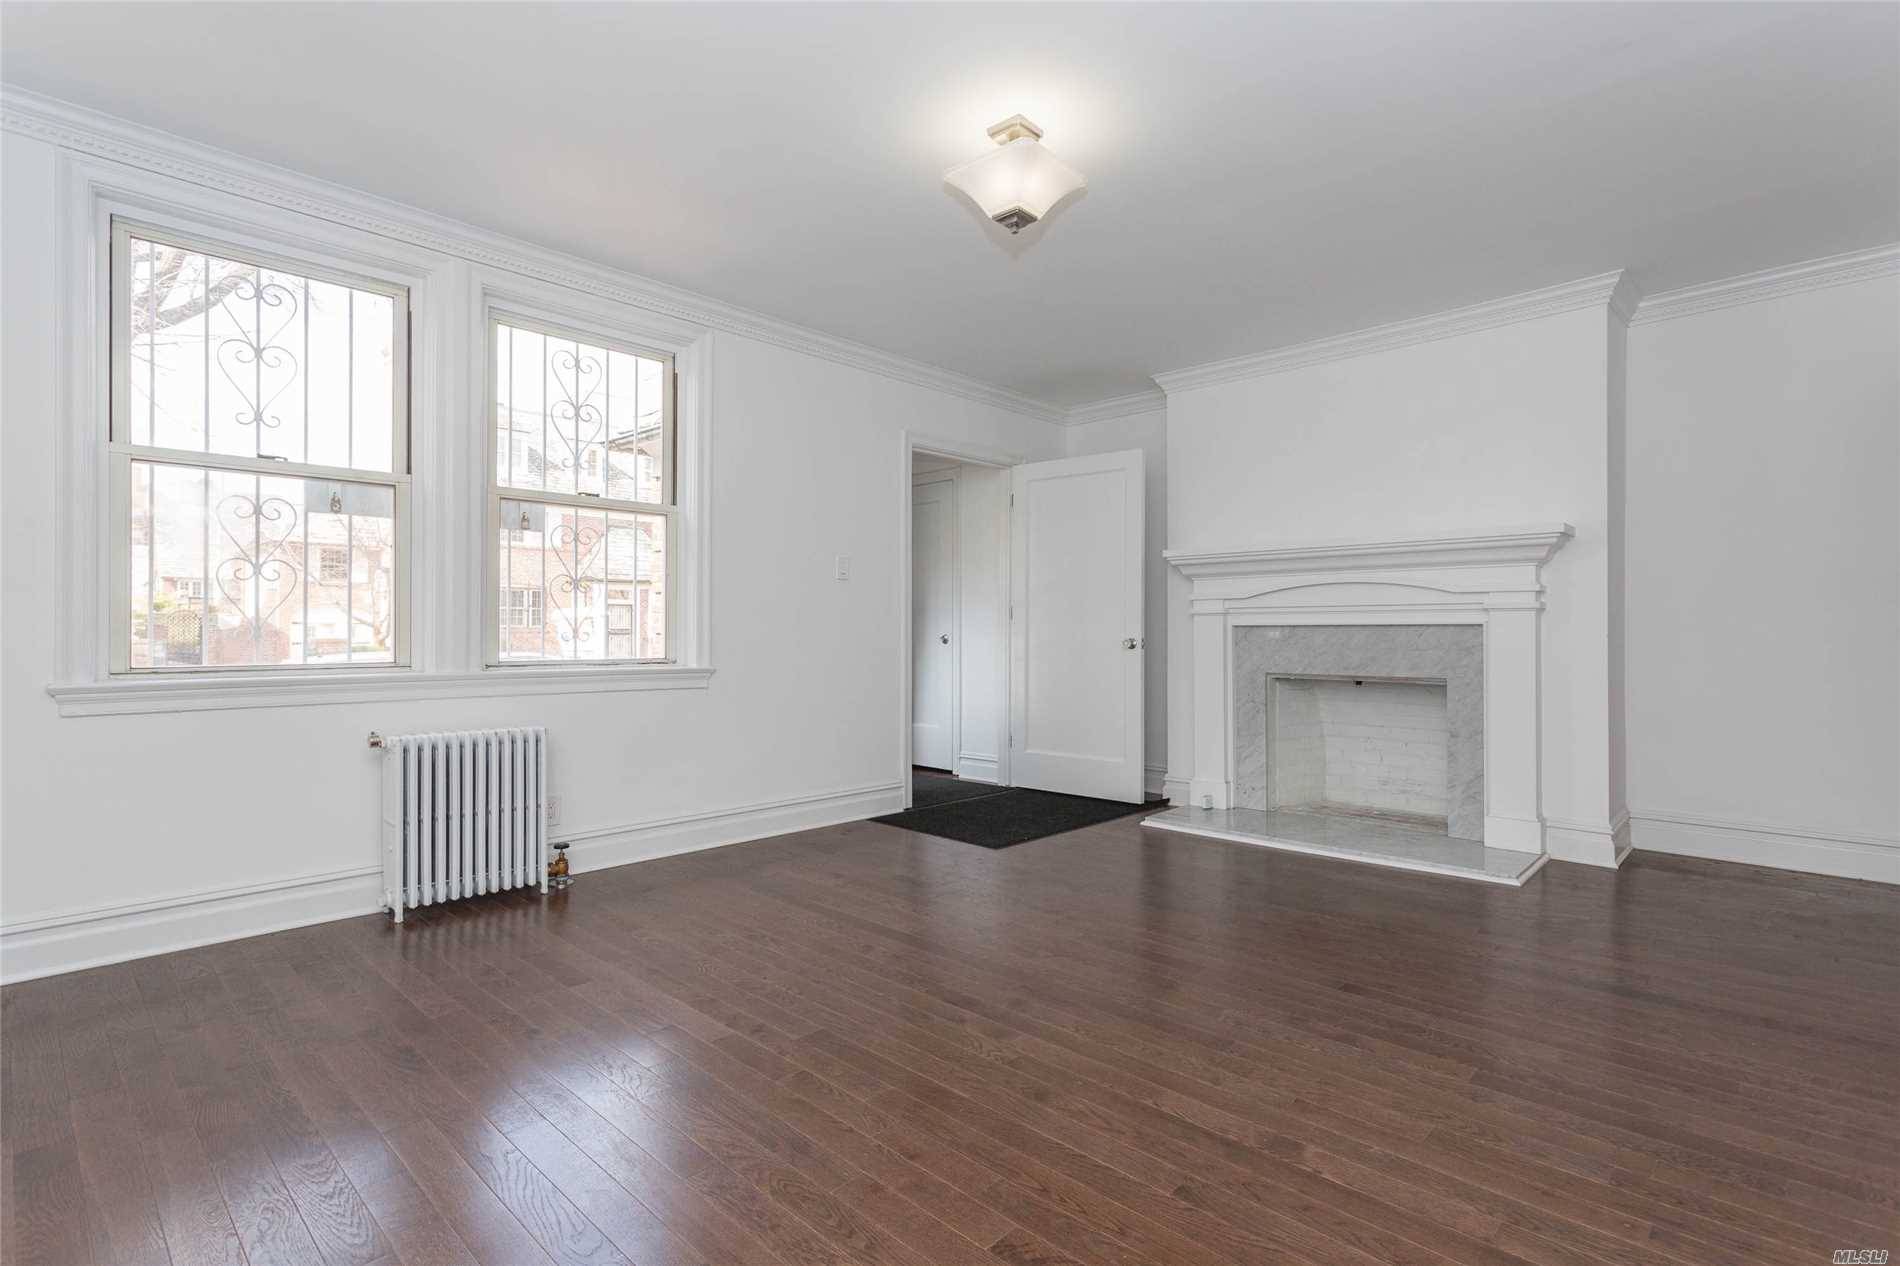 Beautifully Renovated English Garden House In The Historic District Of Jackson Heights!